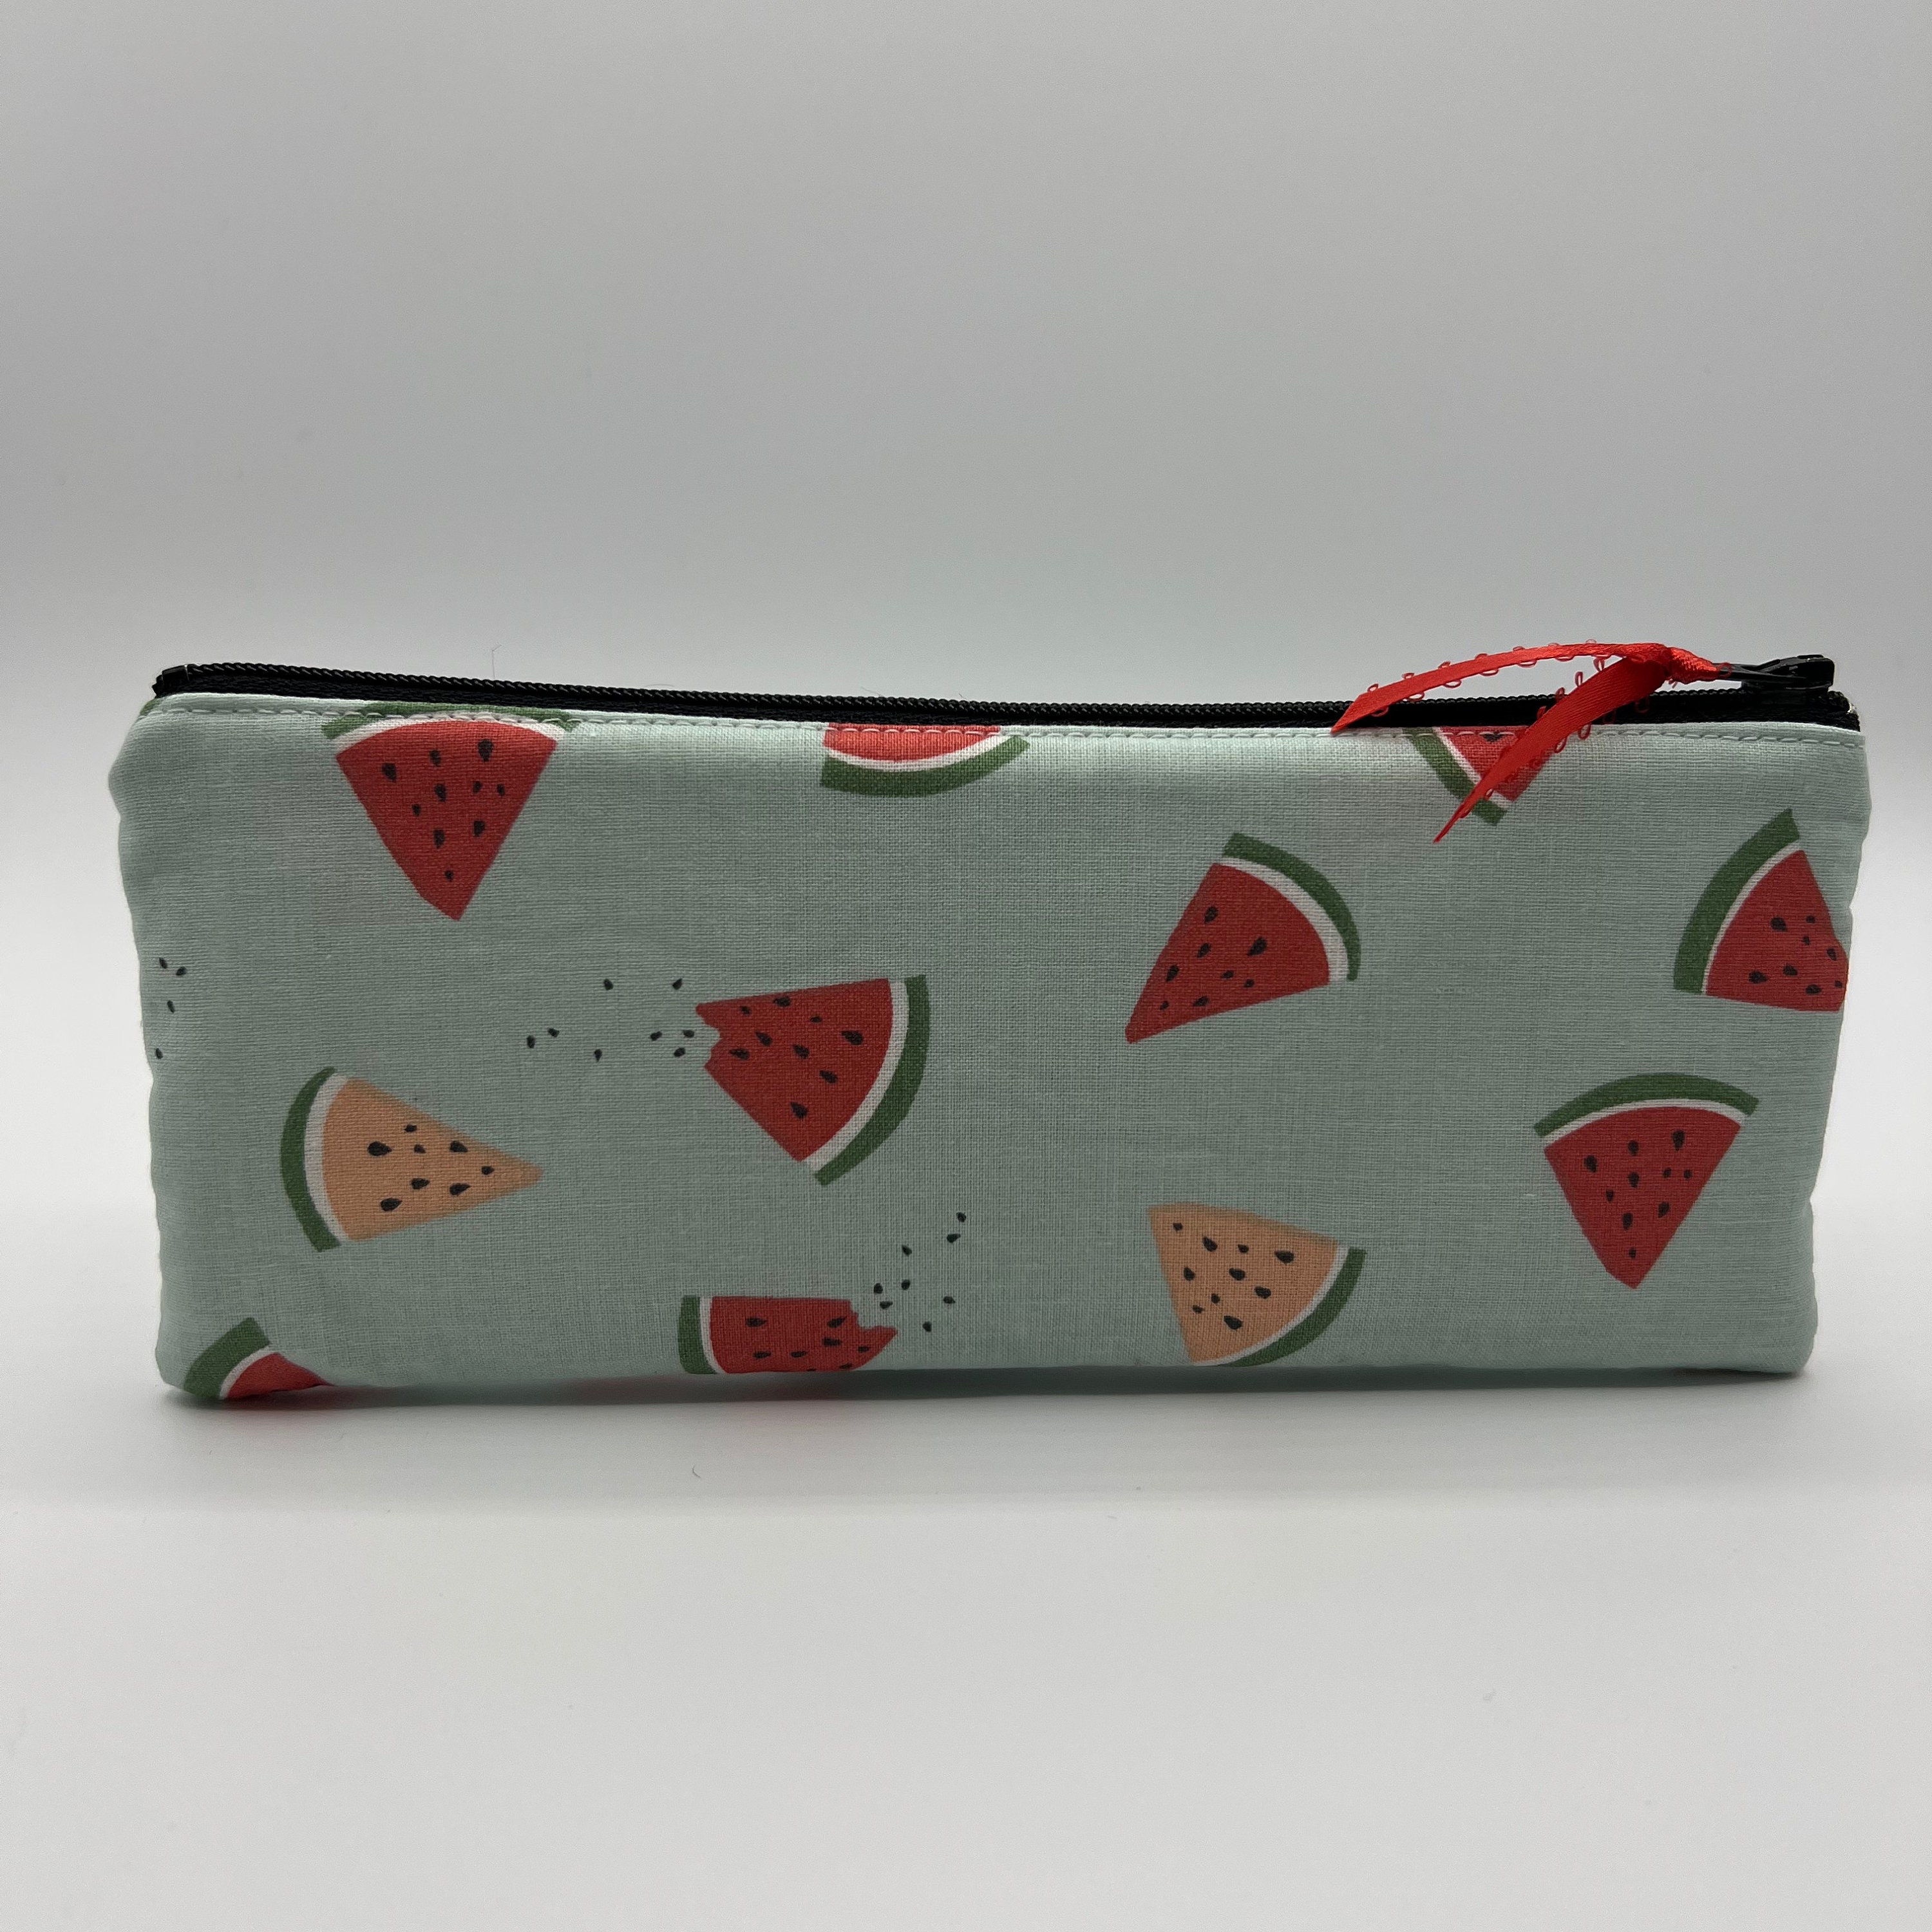 Best Pencil Case For Artists  Top 10 Cute Pencil Cases That Are